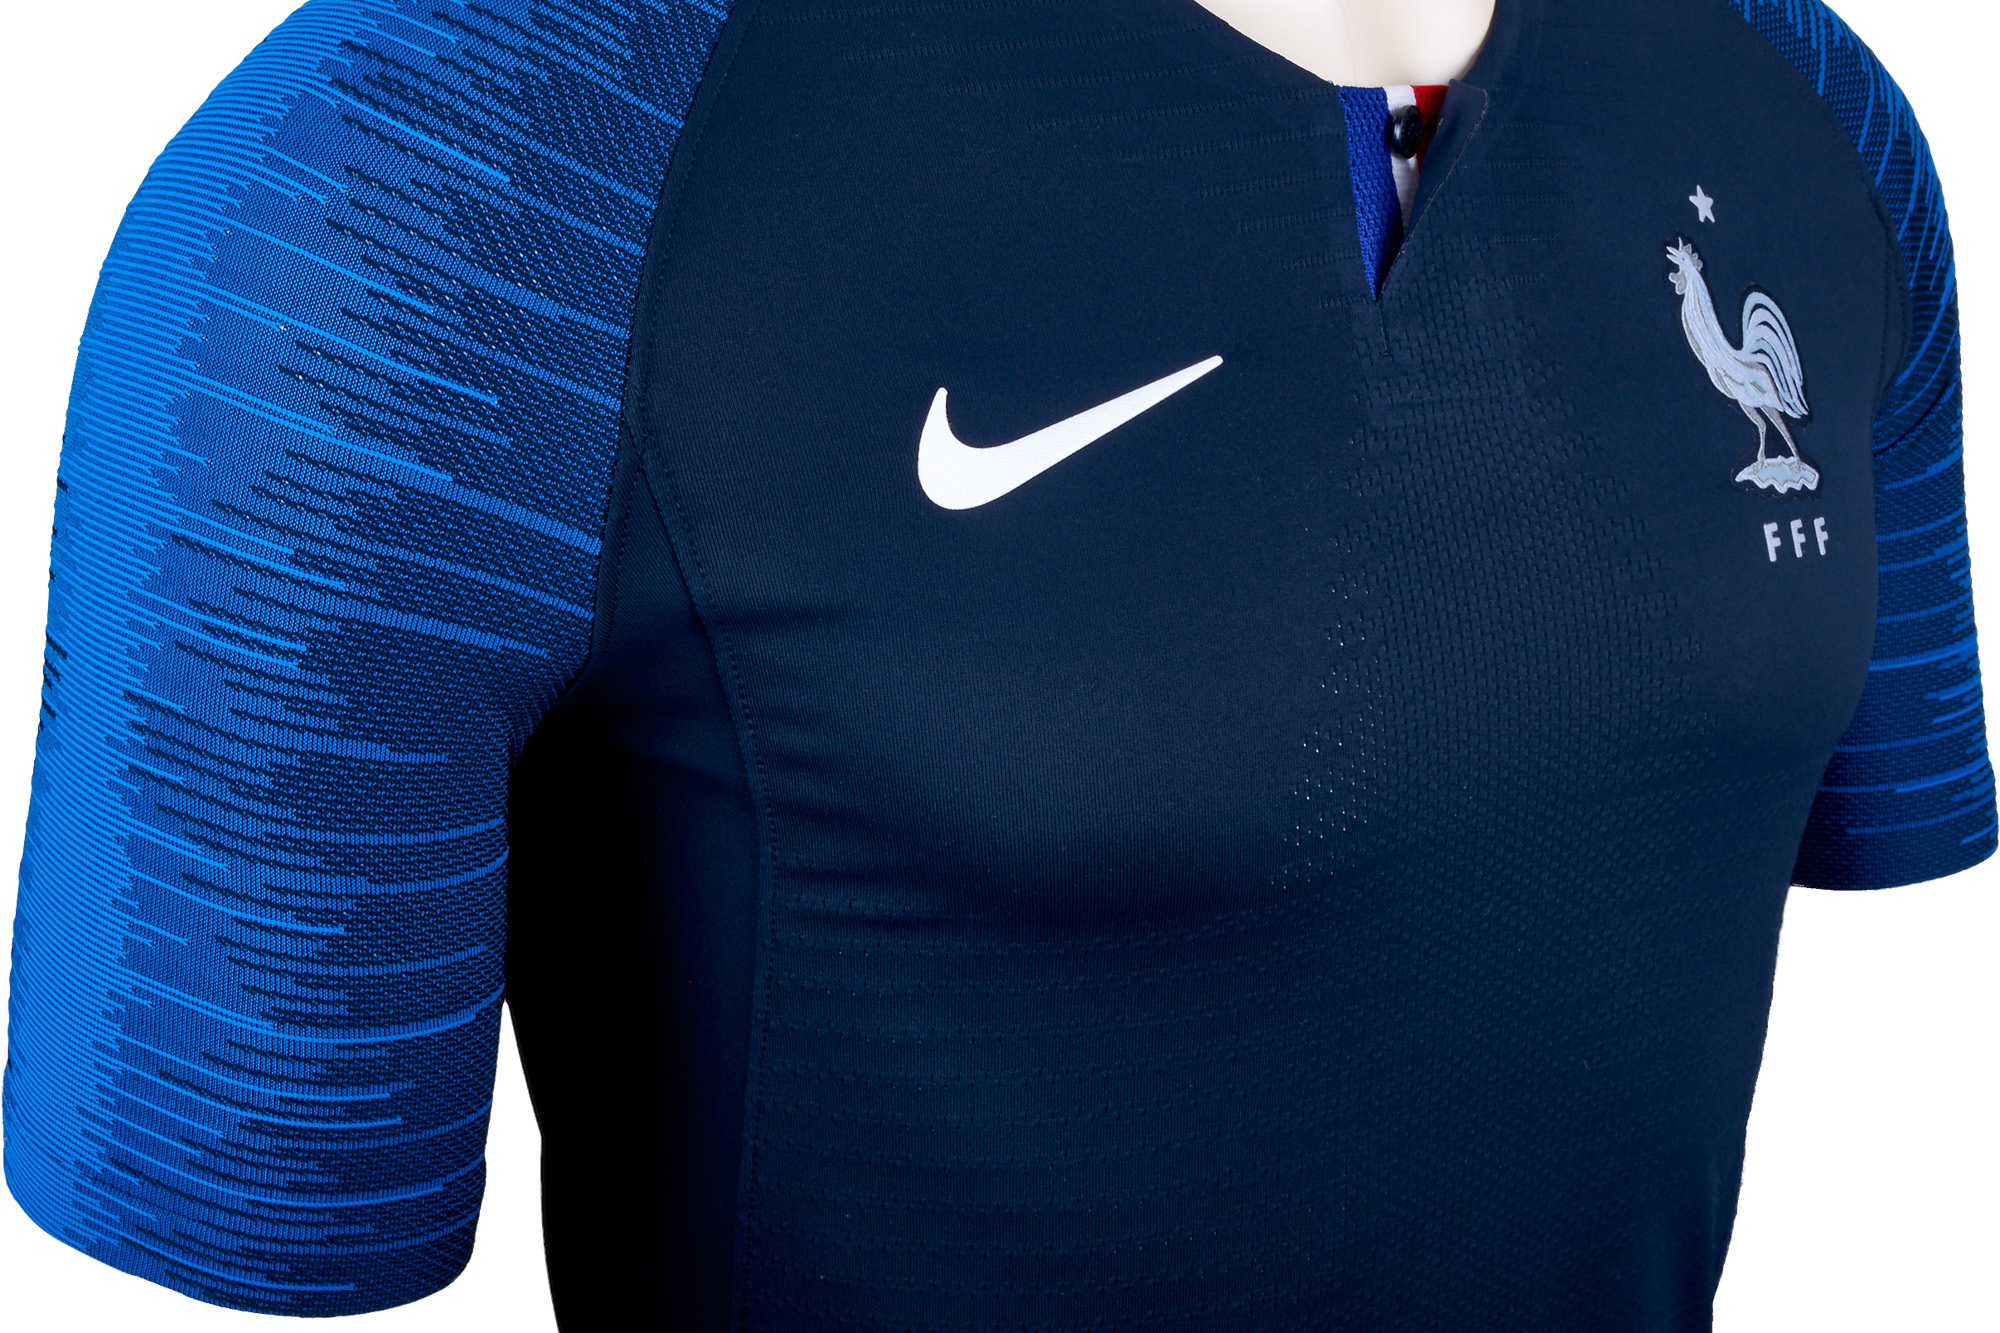 france home jersey